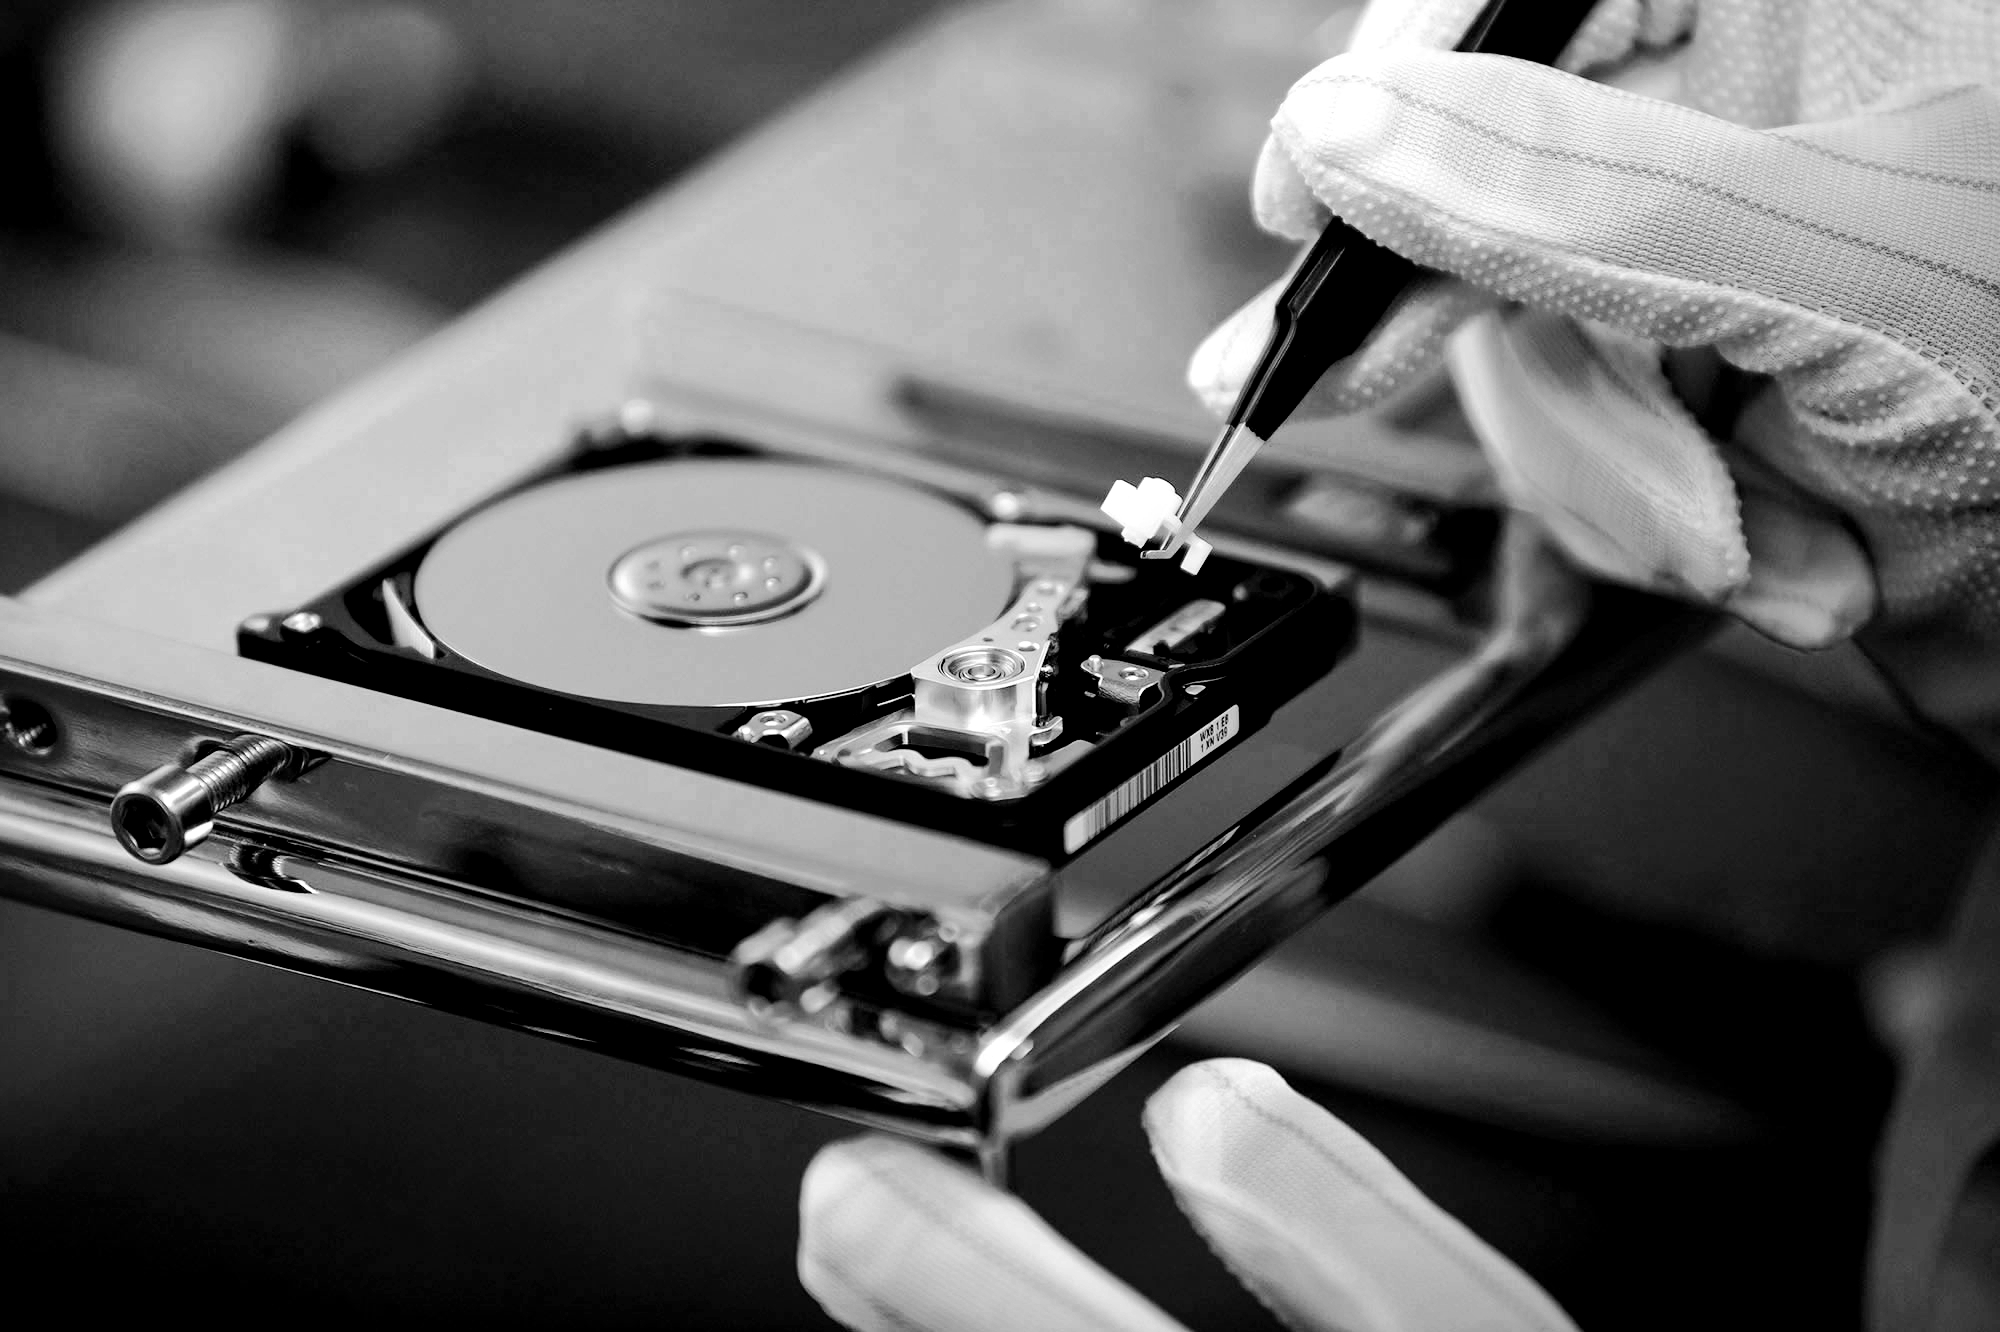 How To Use Data Recovery For Broken Mobile